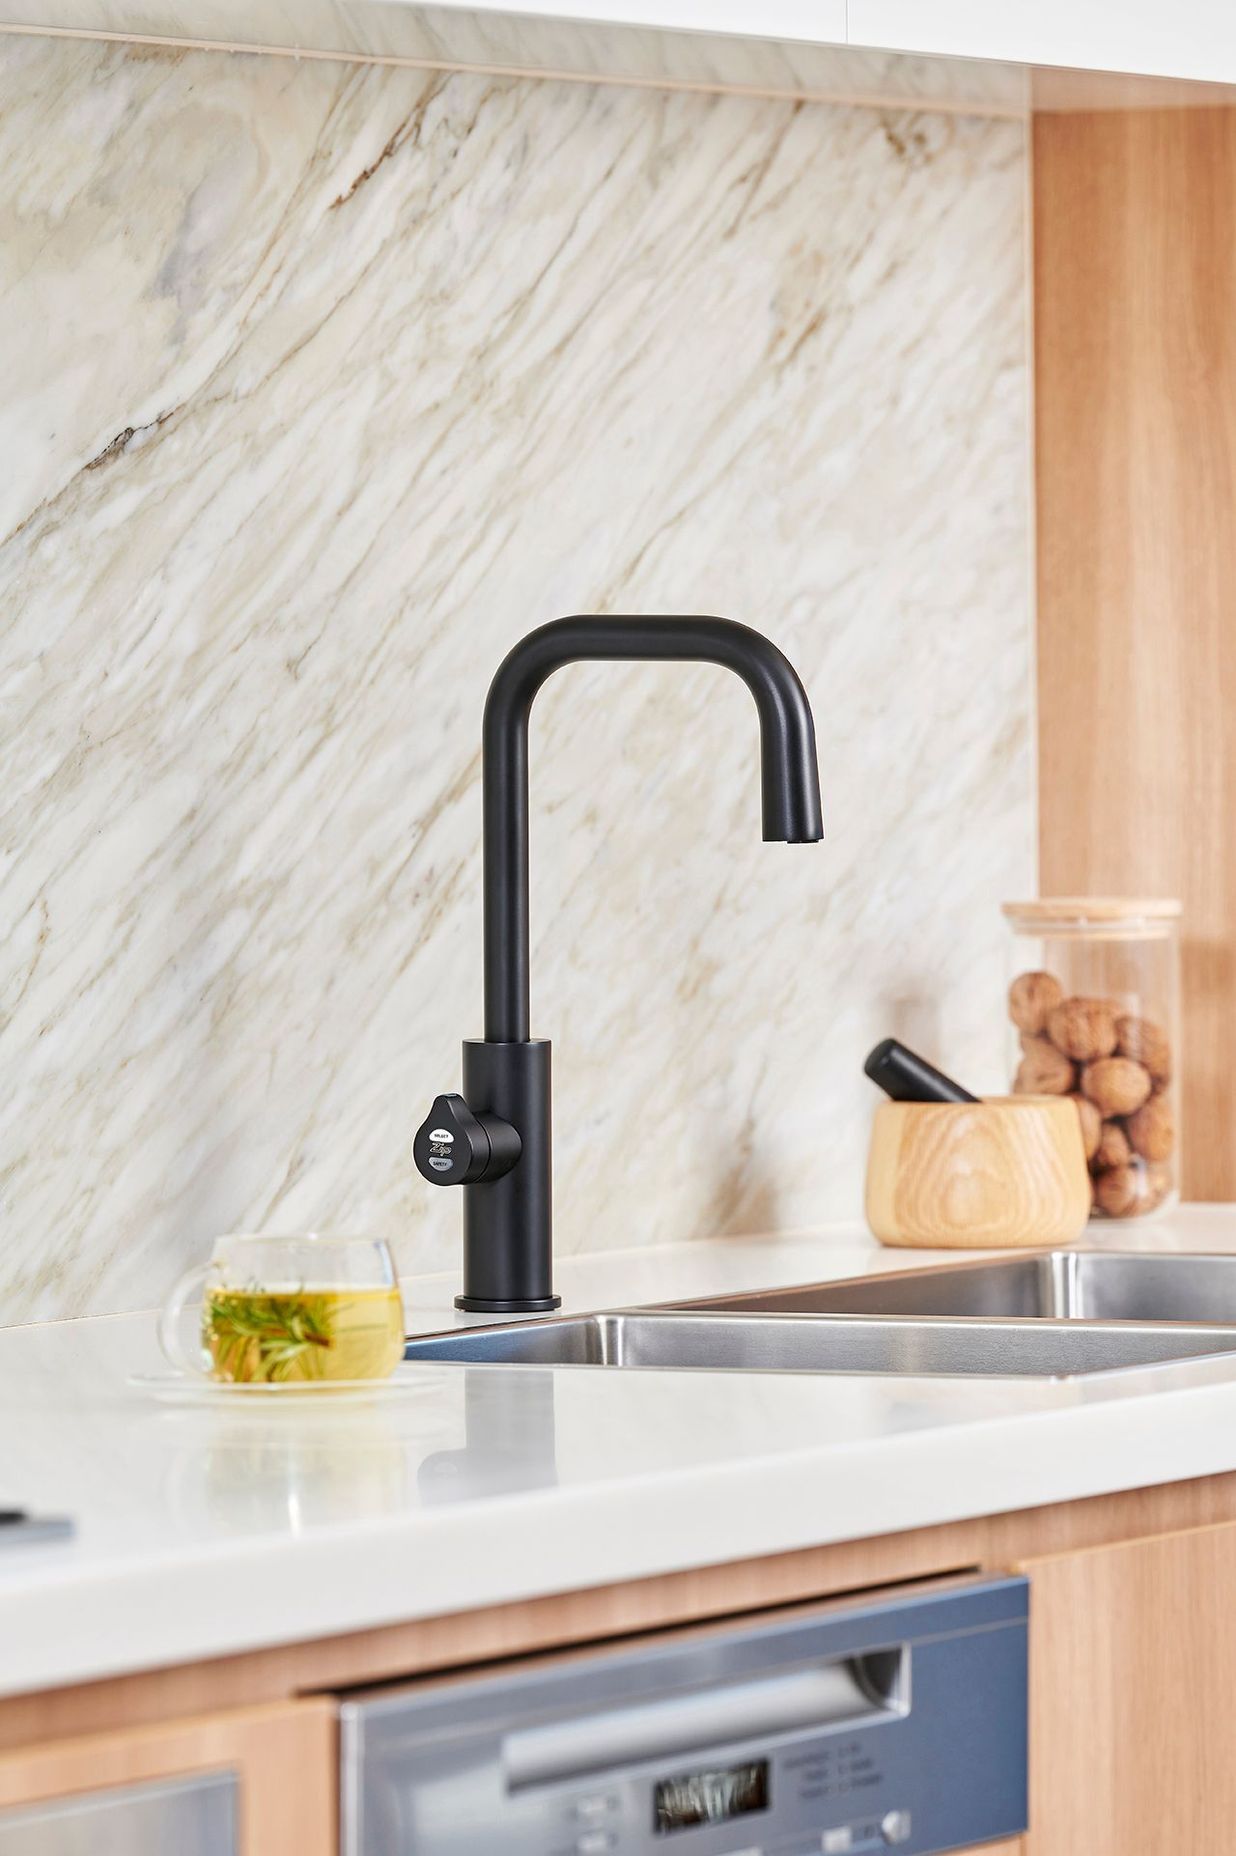 HydroTap Cube Plus by Zip Water | Photography by Guy Davies